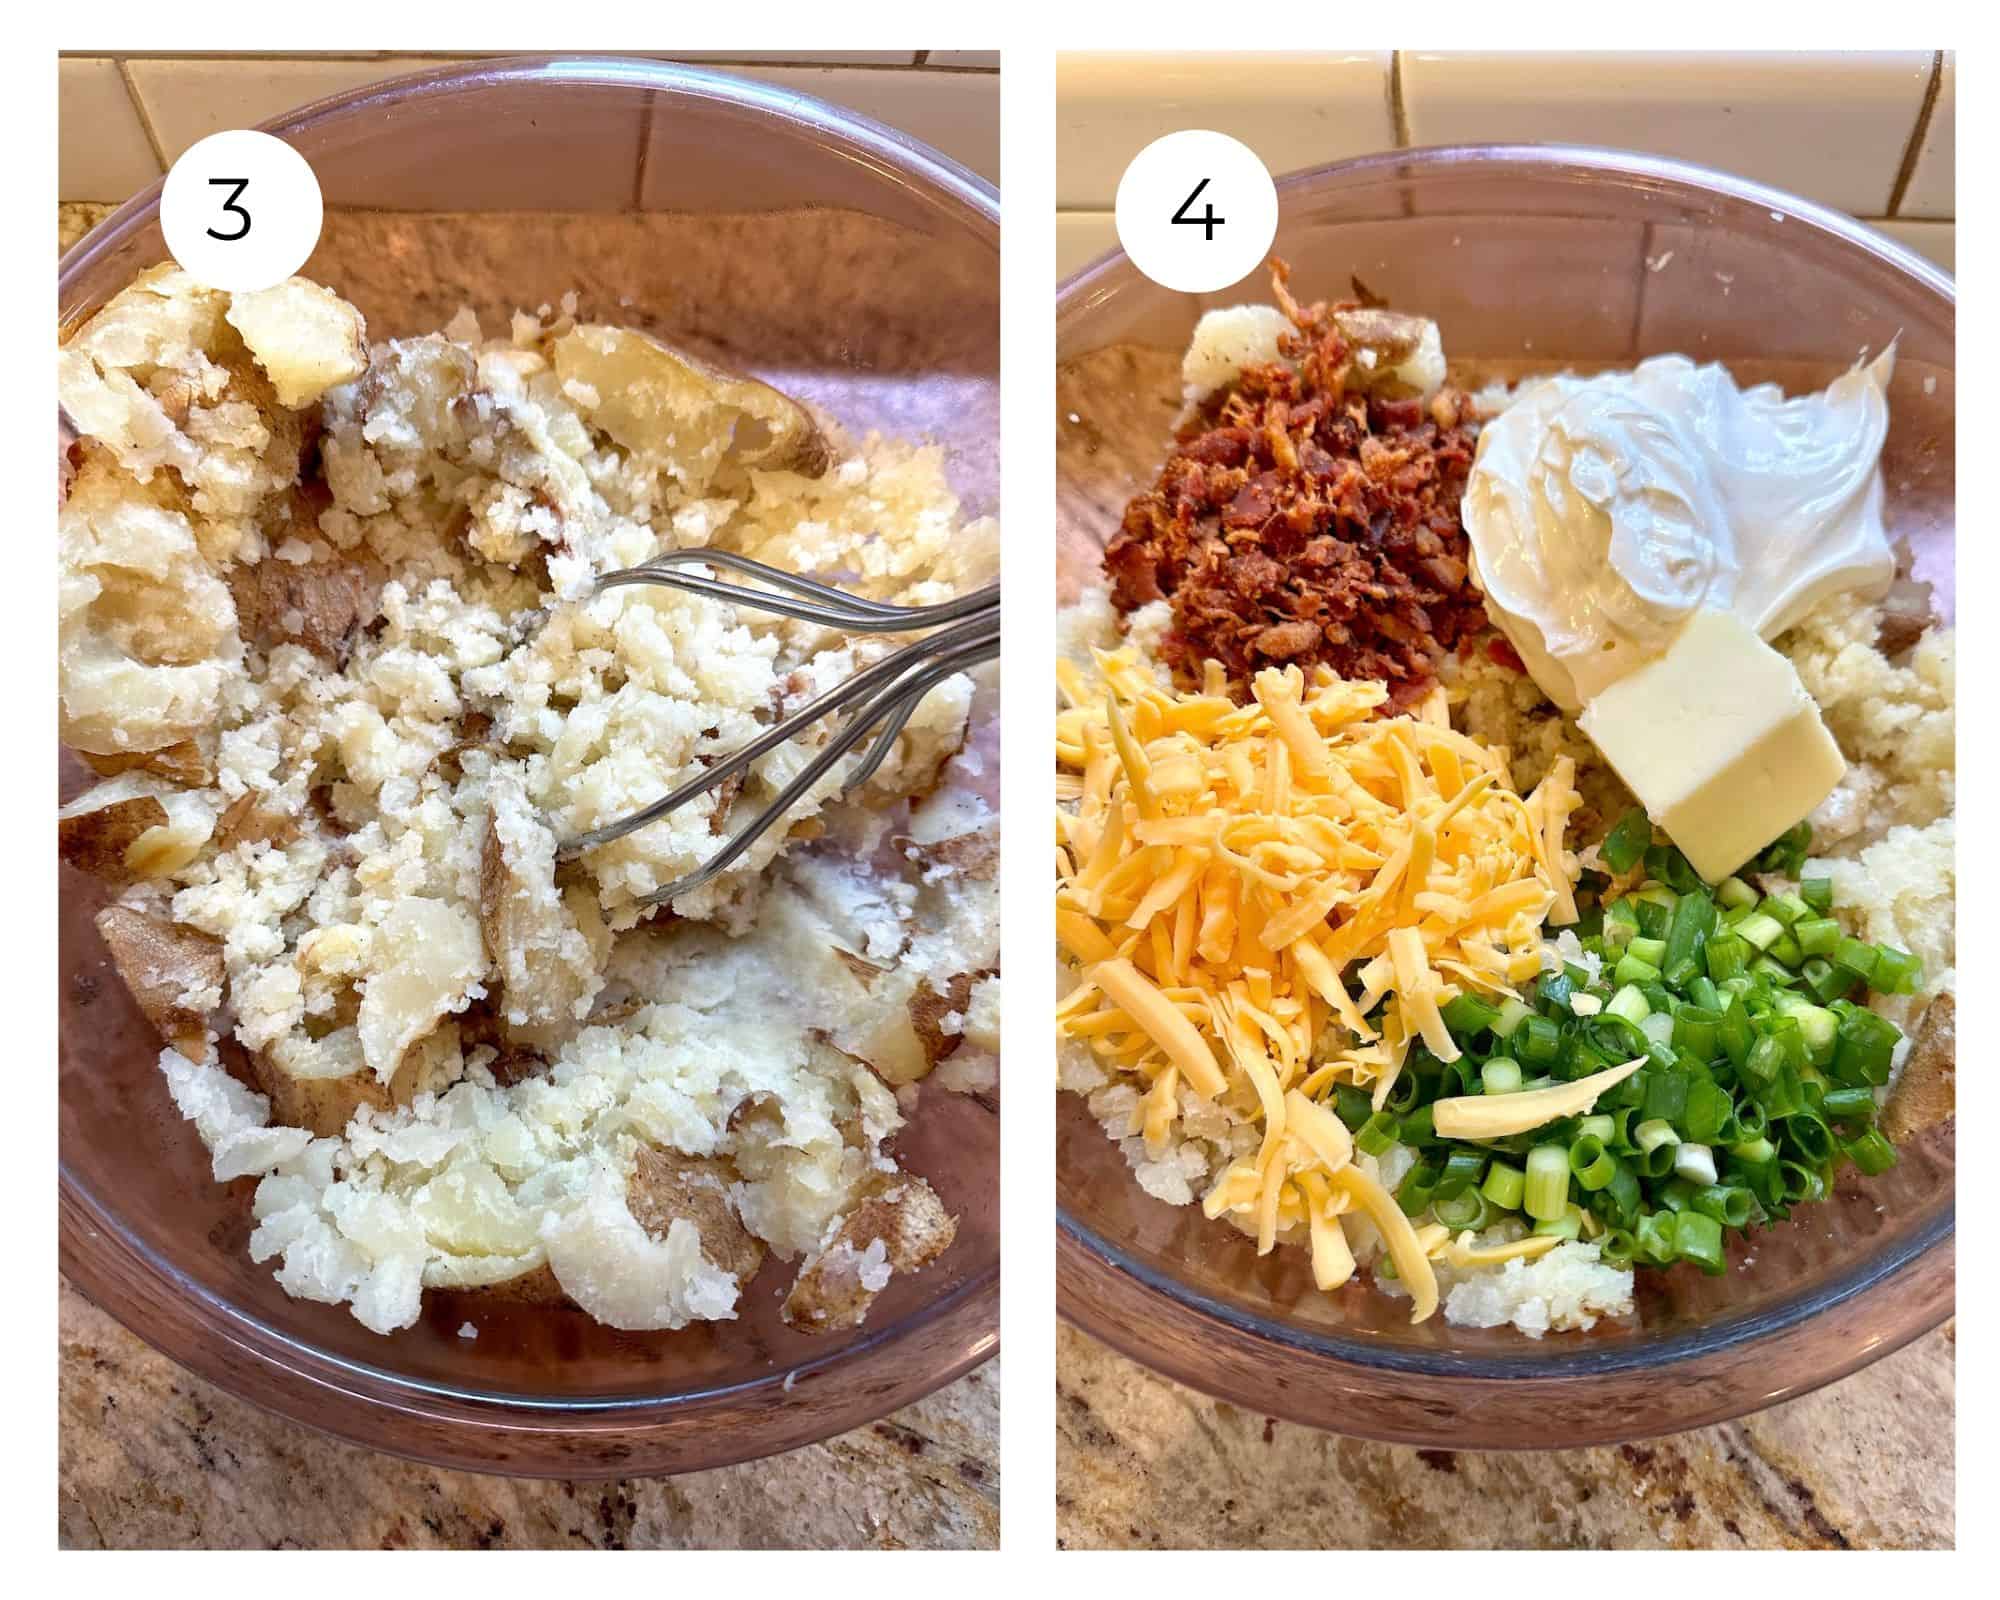 Mashed baked potatoes and a photo with additional ingredients layered on top in a large bowl.